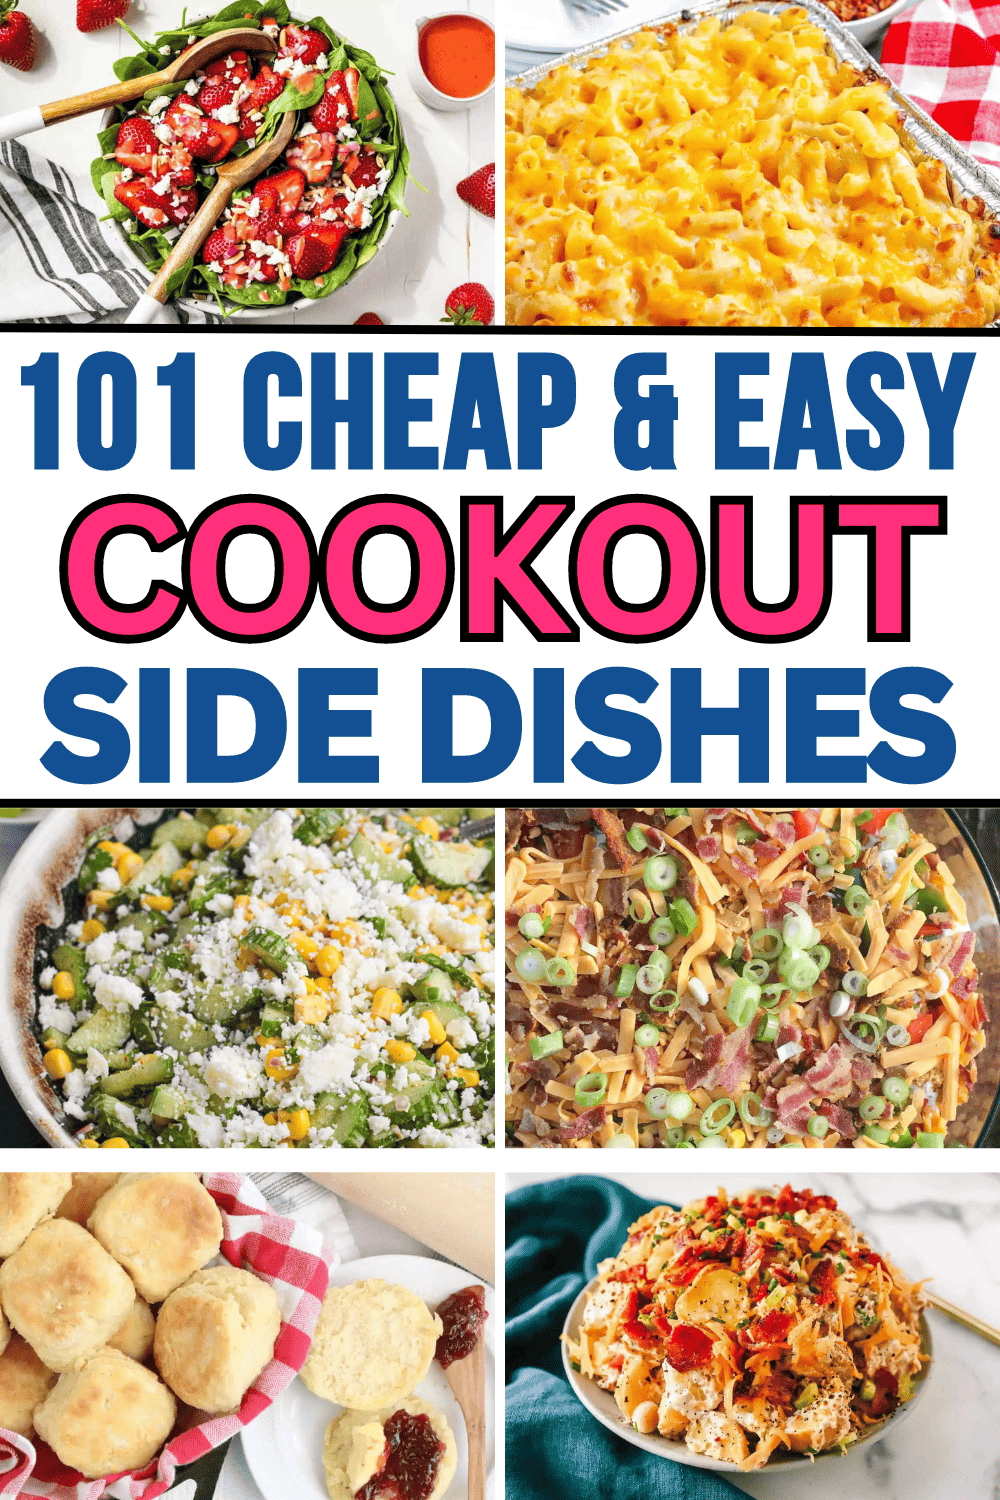 Best cookout side dishes for summer BBQ! These easy side dishes for bbq chicken, ribs, brisket, pork, and steak are easy summer side dish recipes. Cheap easy side dishes for cookout are simple cookout side dishes for a crowd easy, bbq cookout food side dishes, cookout food ideas side dishes, summer barbecue side dishes easy, memorial day cookout side dishes, summer cookout side dishes comfort foods, easy cookout food side dishes, sides for grilling burgers, cookout side dishes family gatherings.